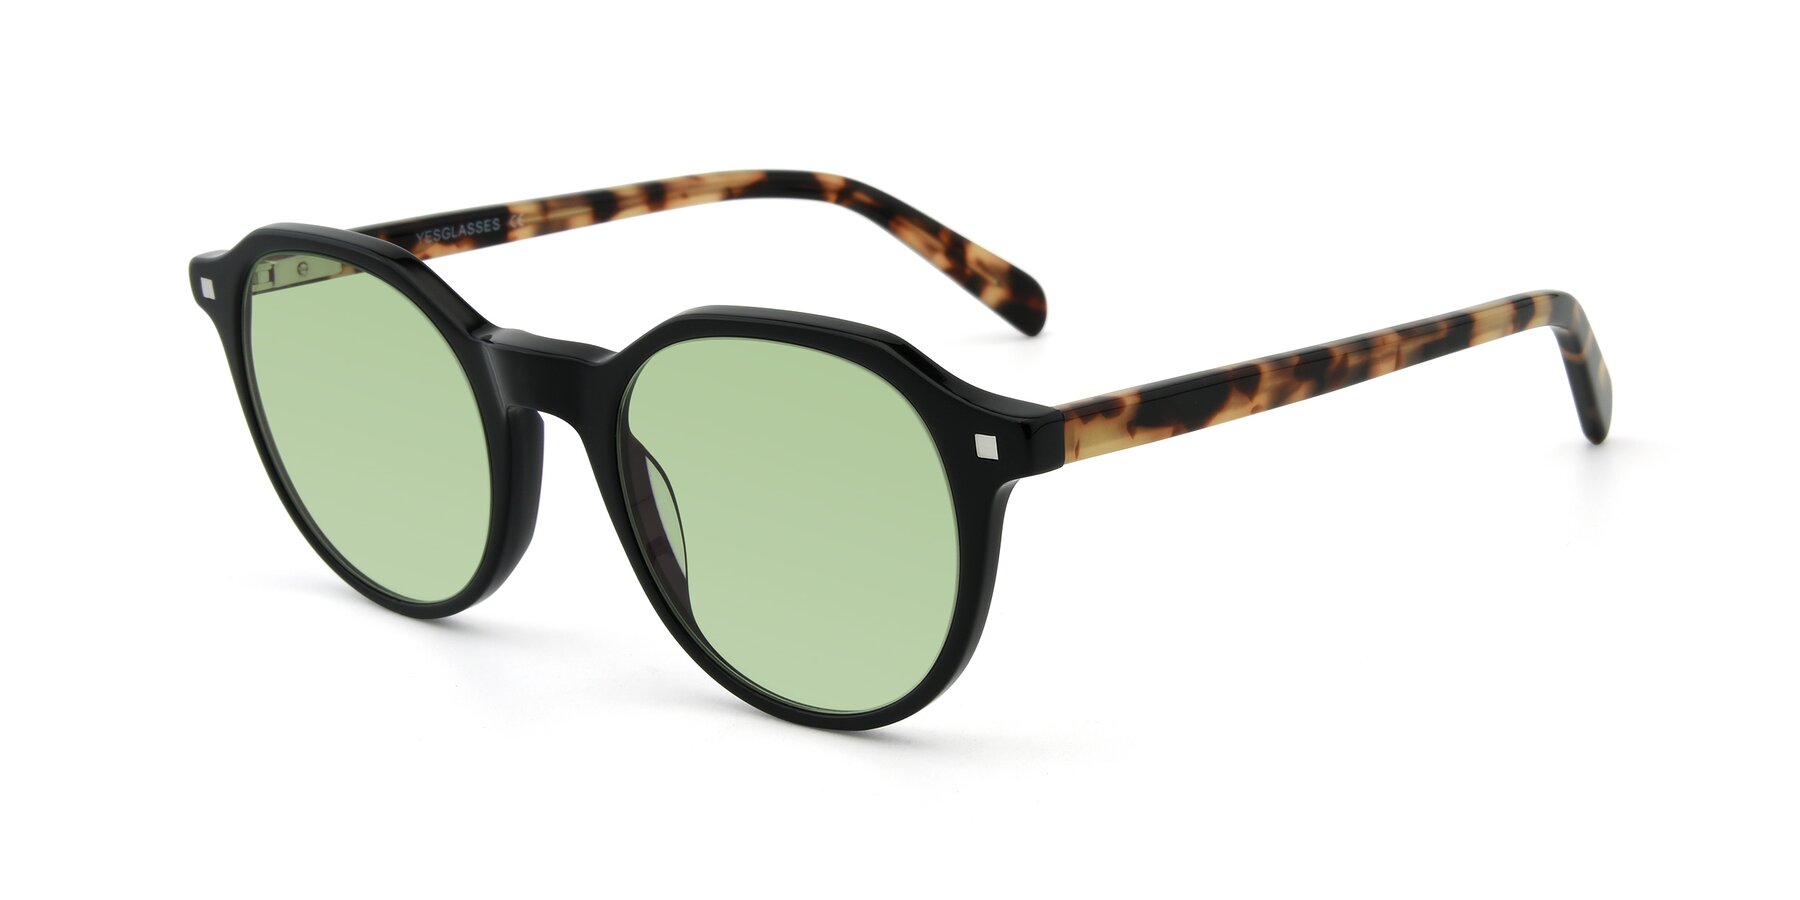 Angle of 17425 in Black with Medium Green Tinted Lenses